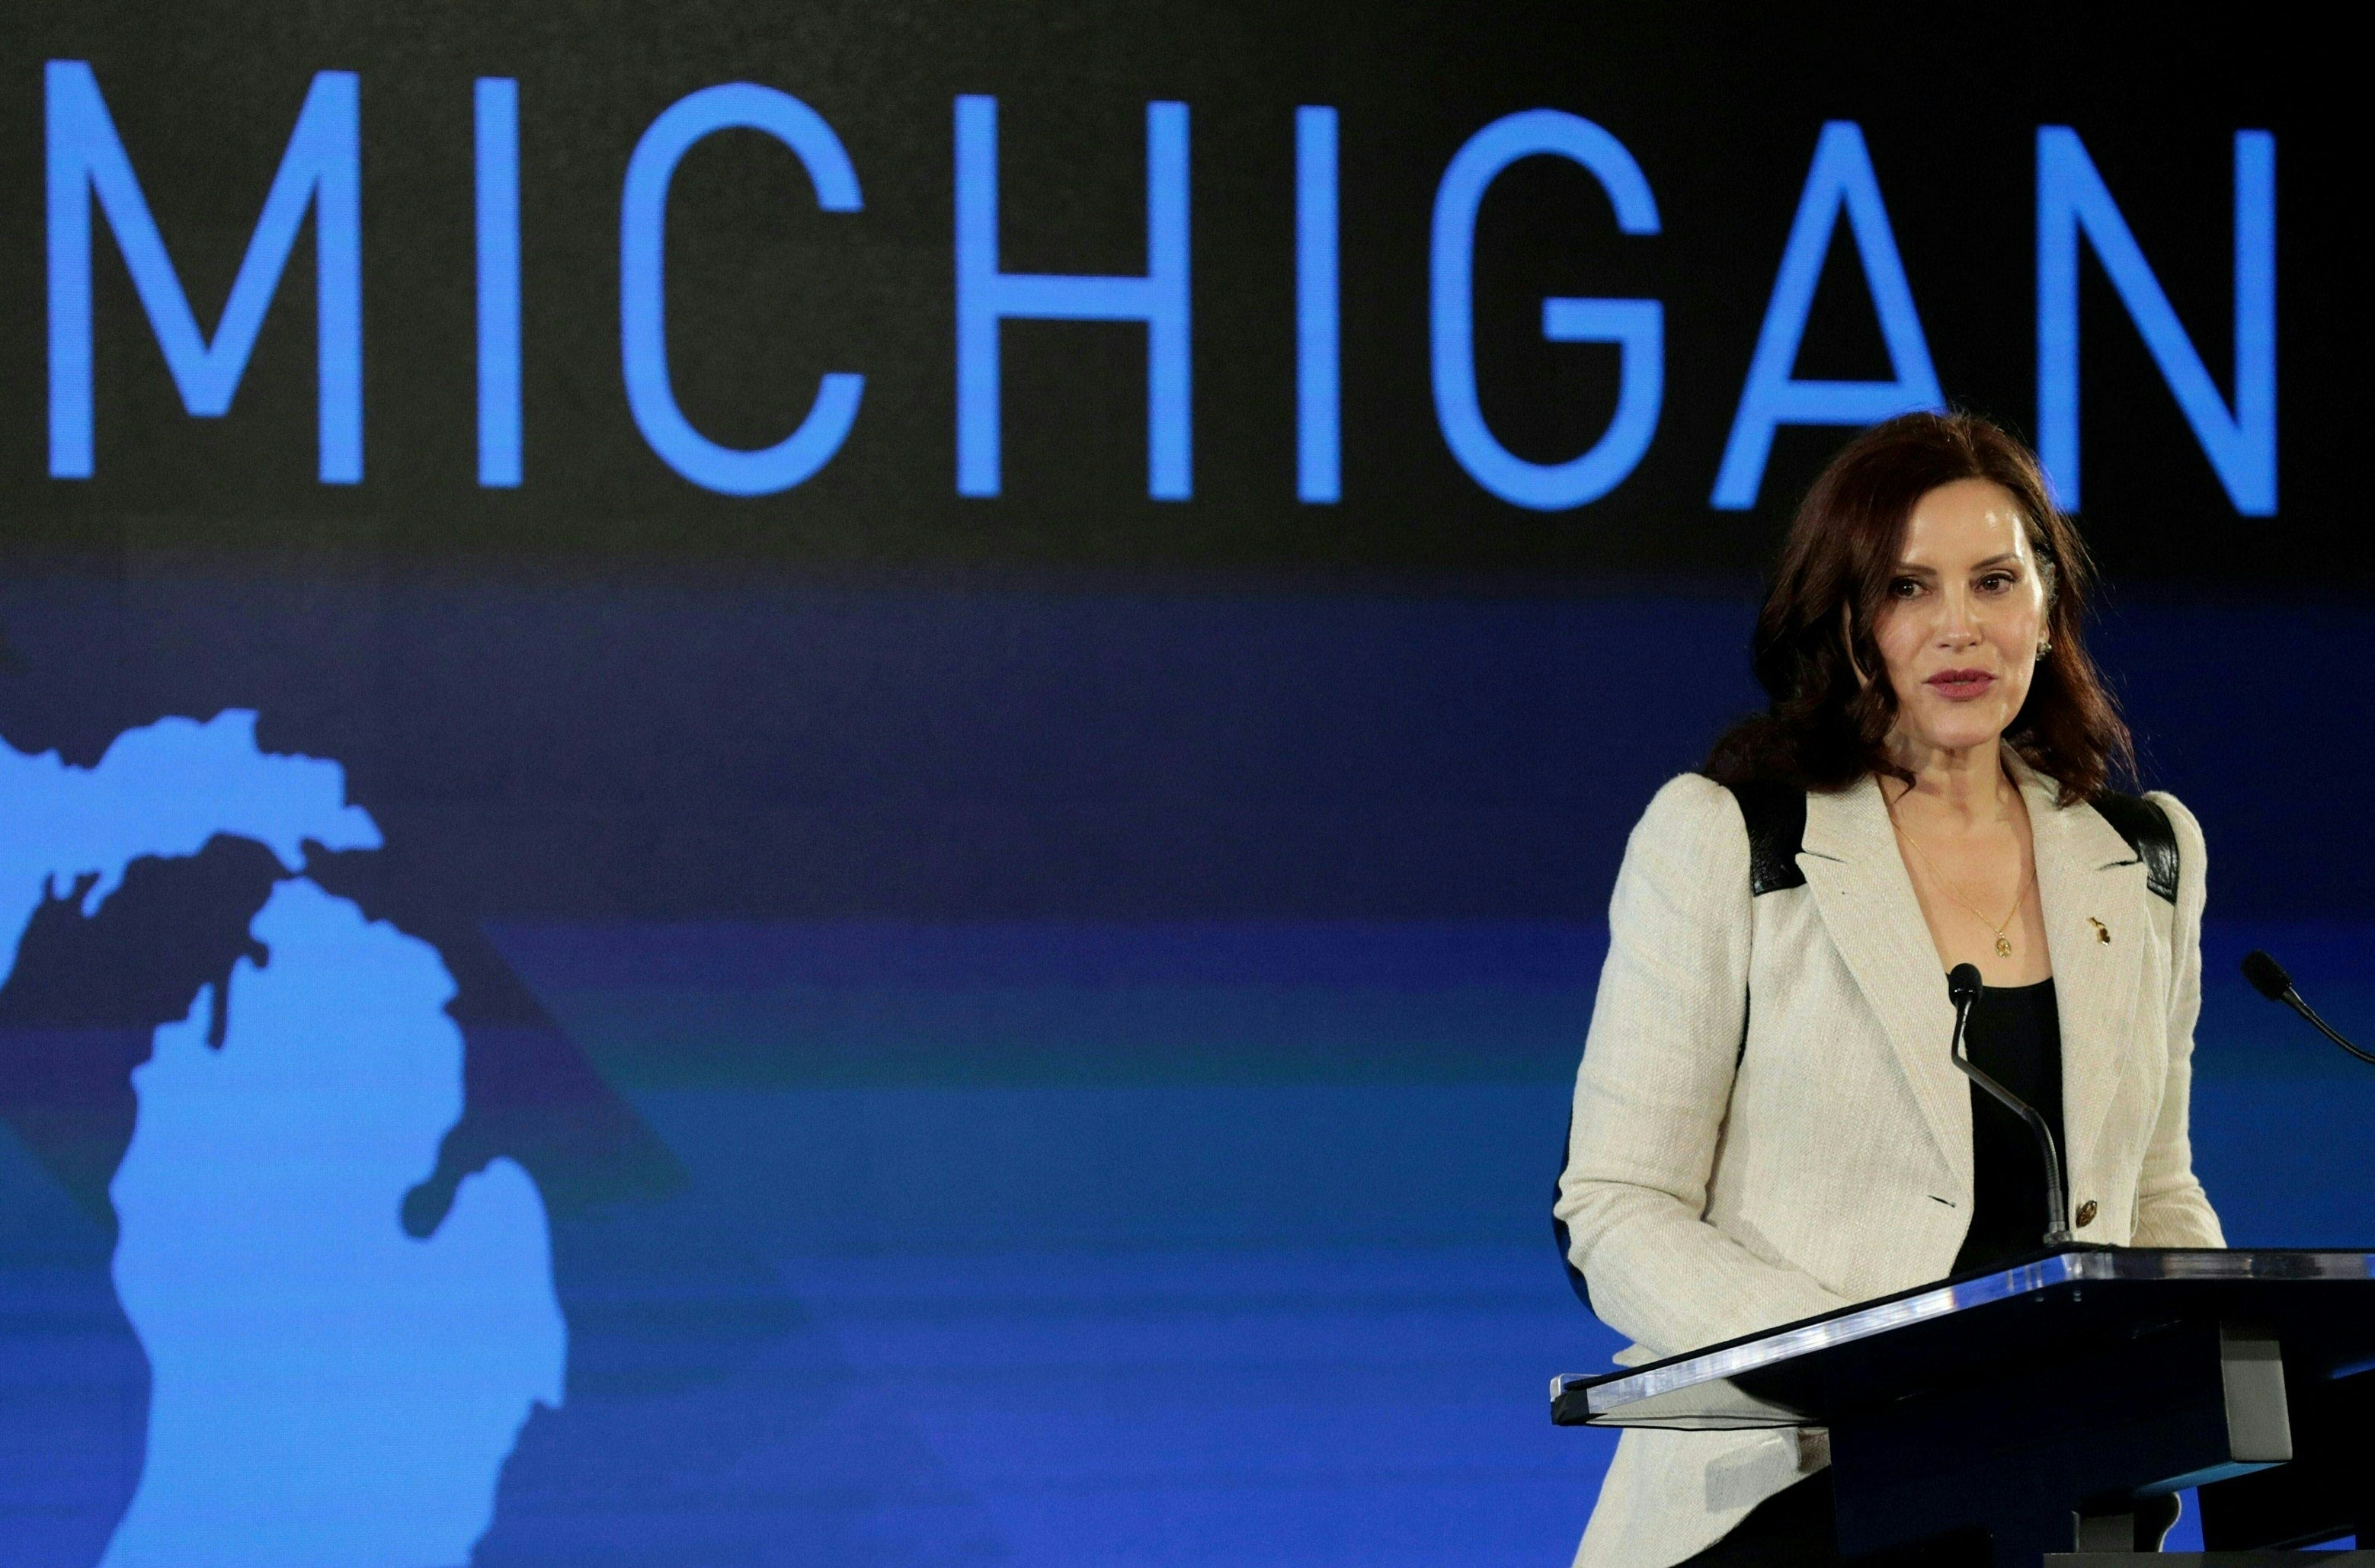 Michigan governer Gretchen Whitmer reportedly said Biden will not be able to win her state after the CNN debate